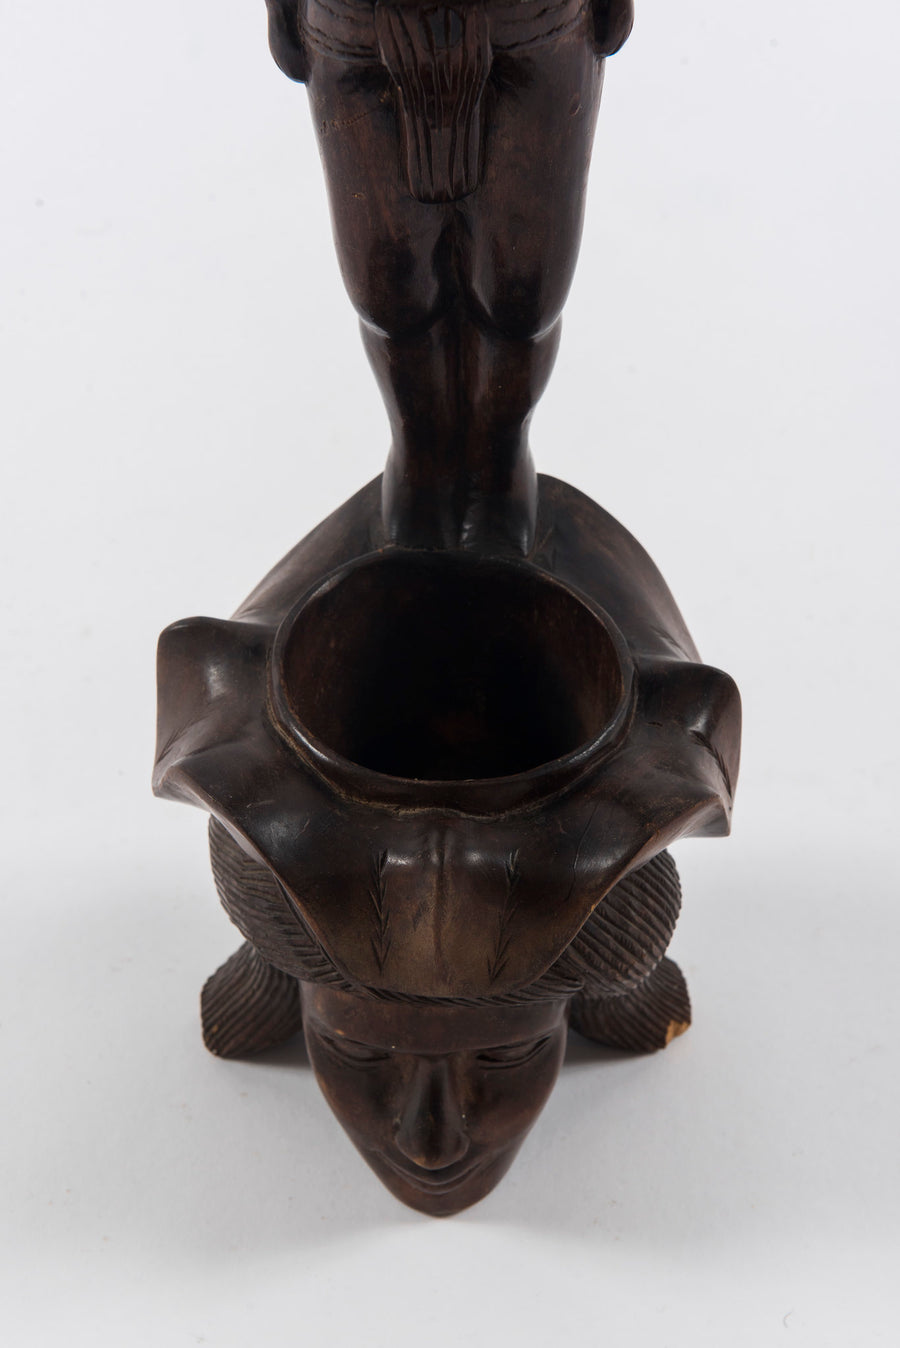 Carved Standing African Male Sculpture Head Pot